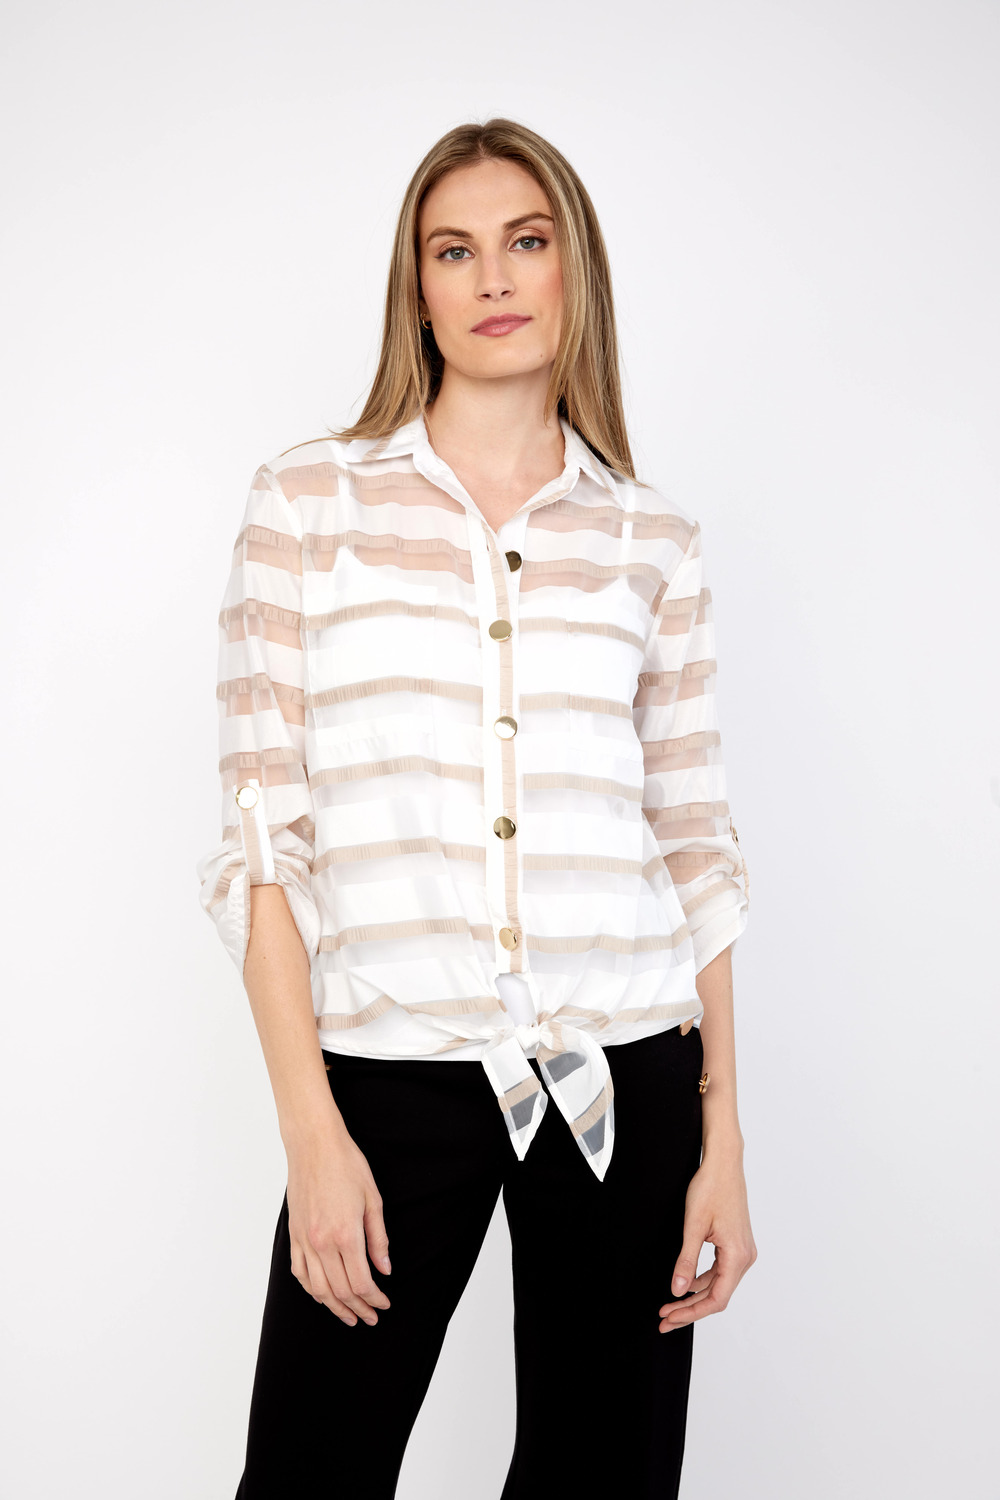 Sheer Striped Blouse Style 236288. White